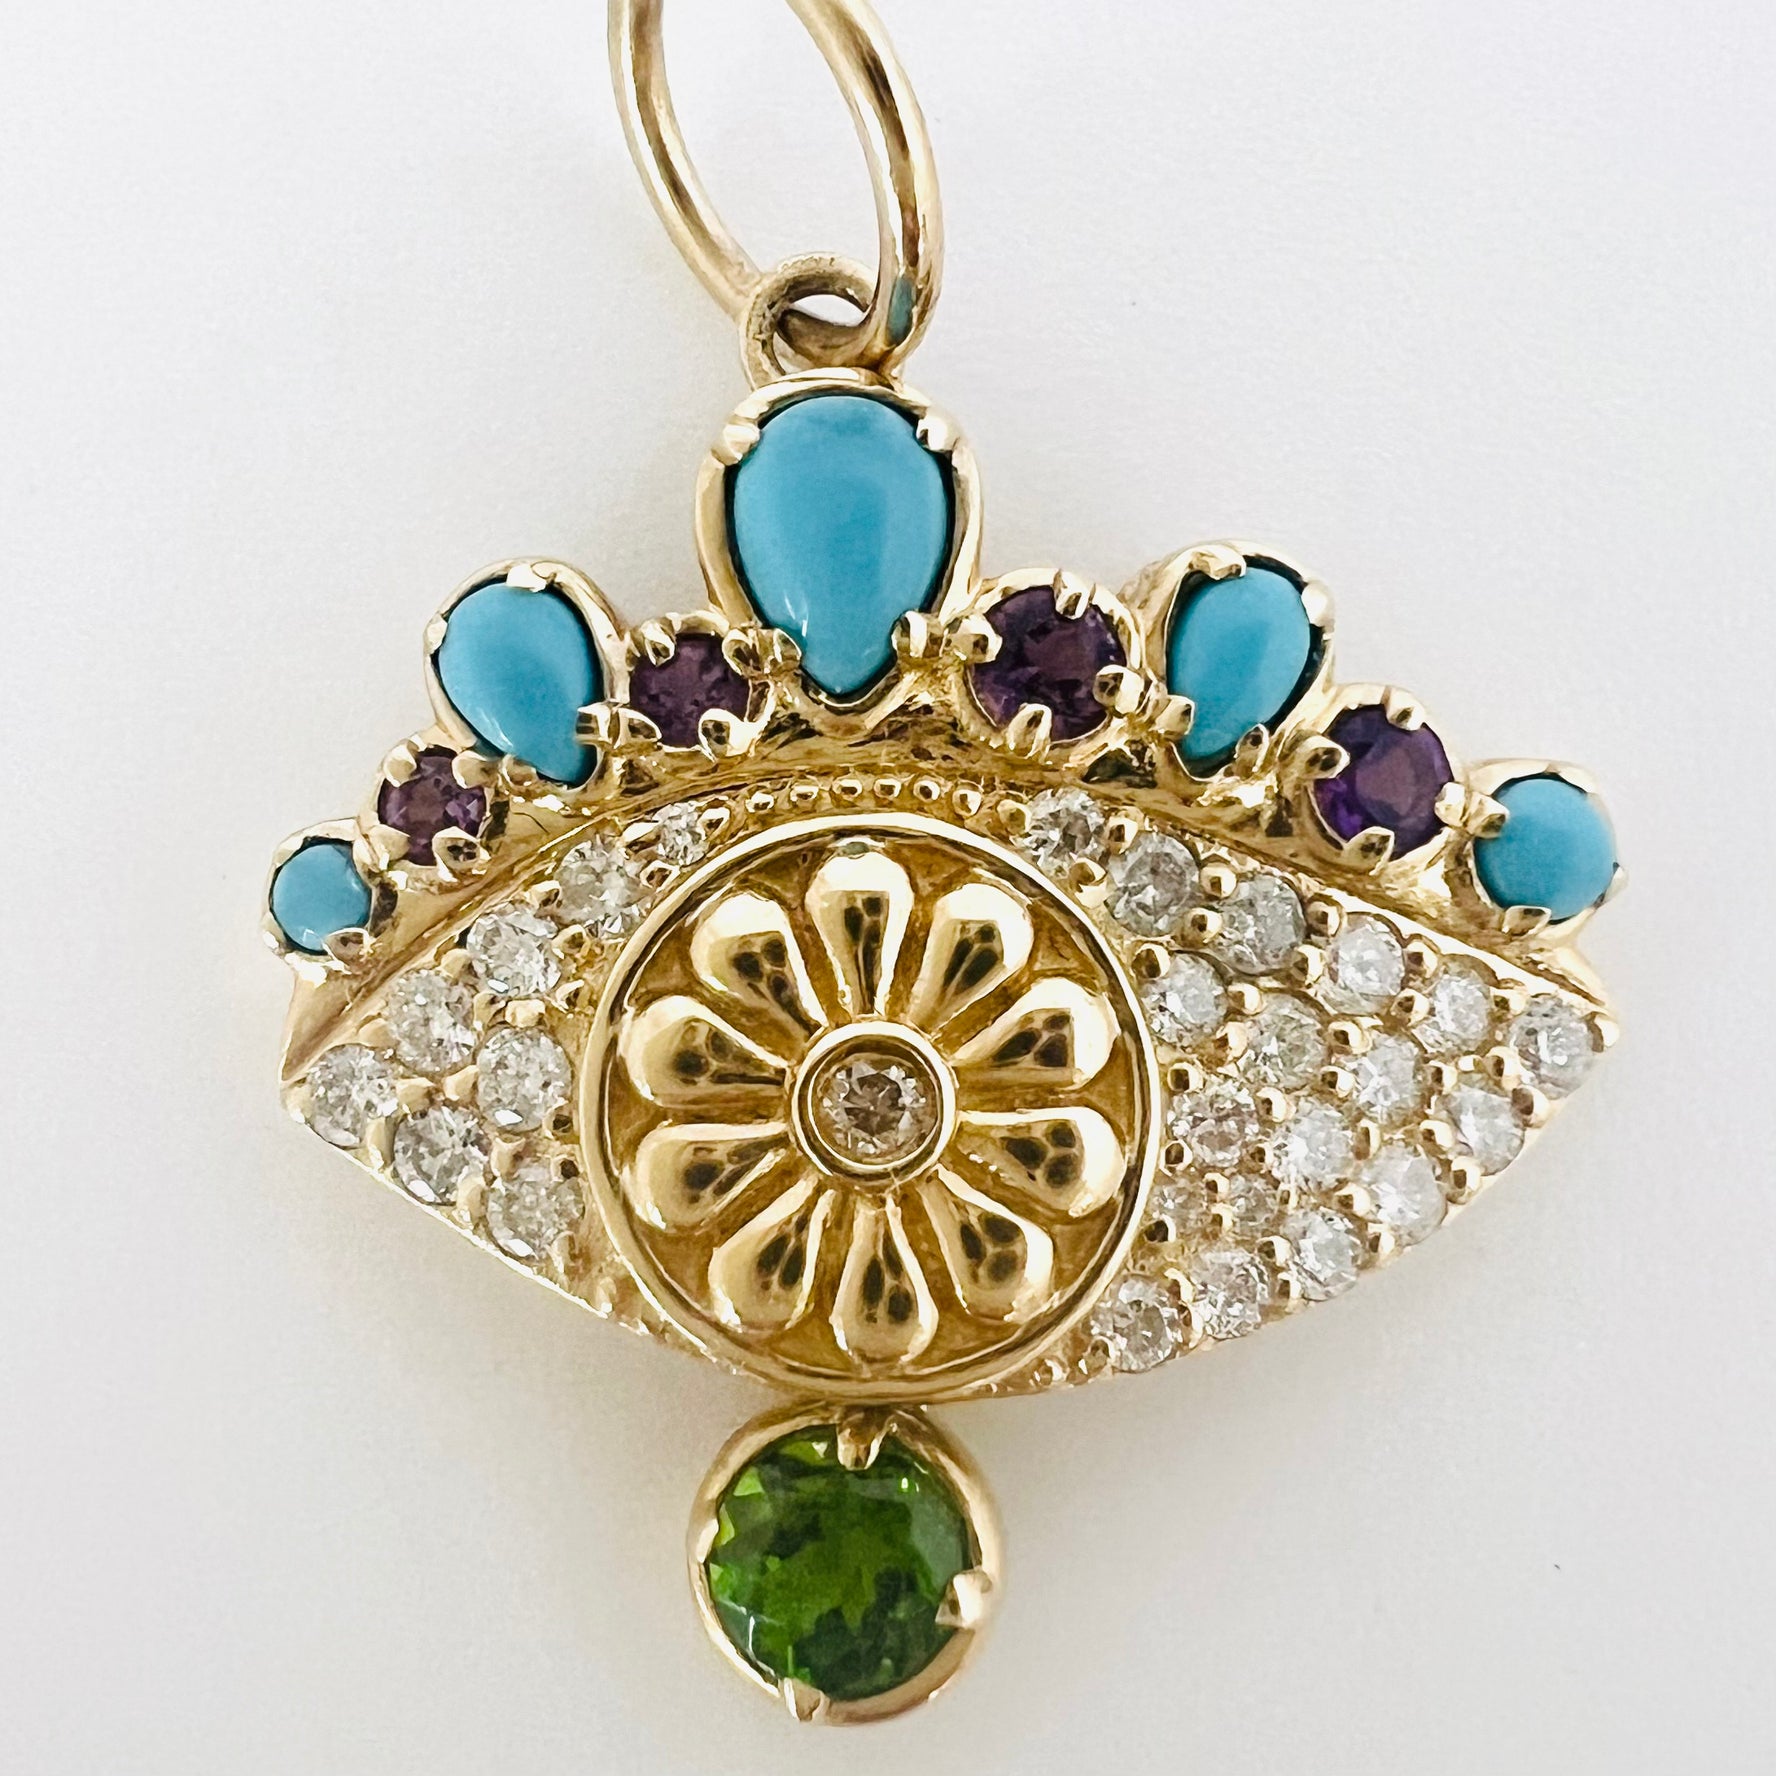 14 k gold with diamond, emerald, amethyst and turquoise evil eye pendant